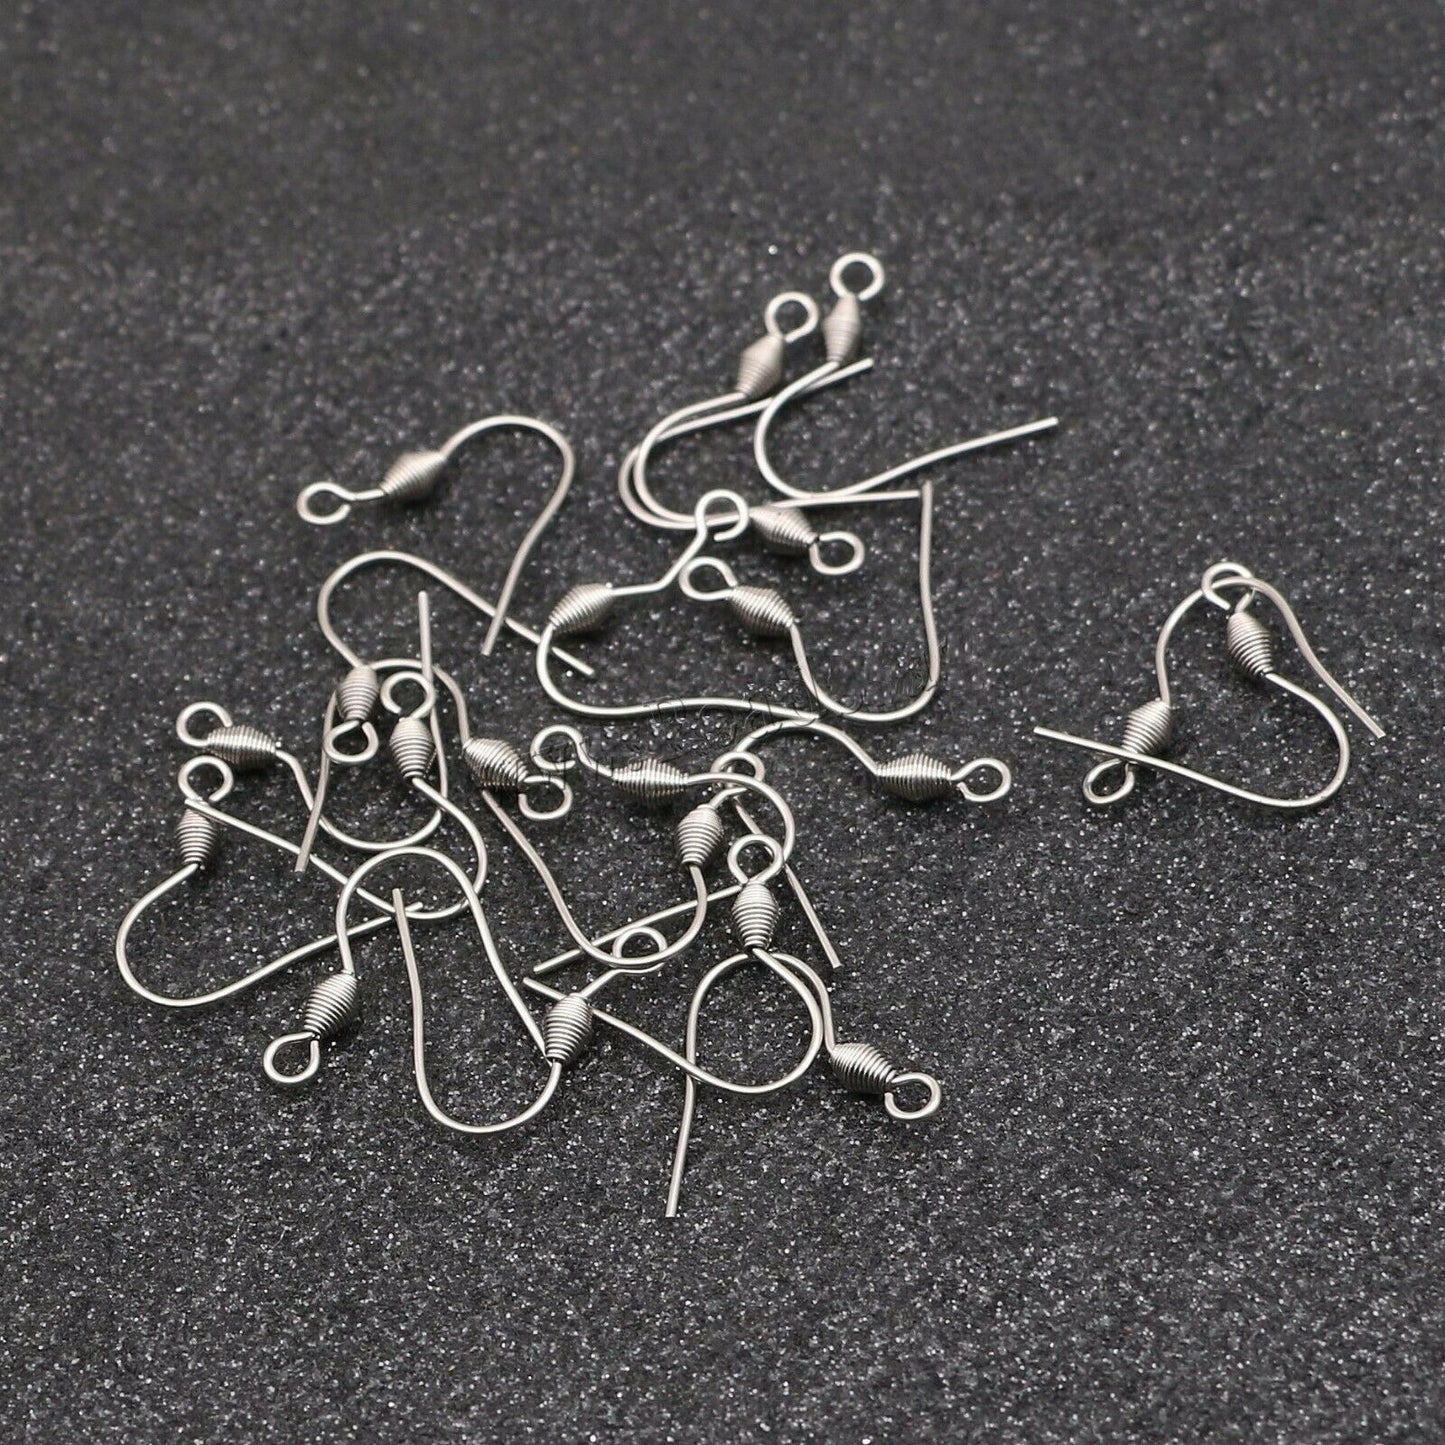 10Pcs Stainless Steel Fish Hook Earring Earwires Crafting 0.70x19mm-5 Pairs